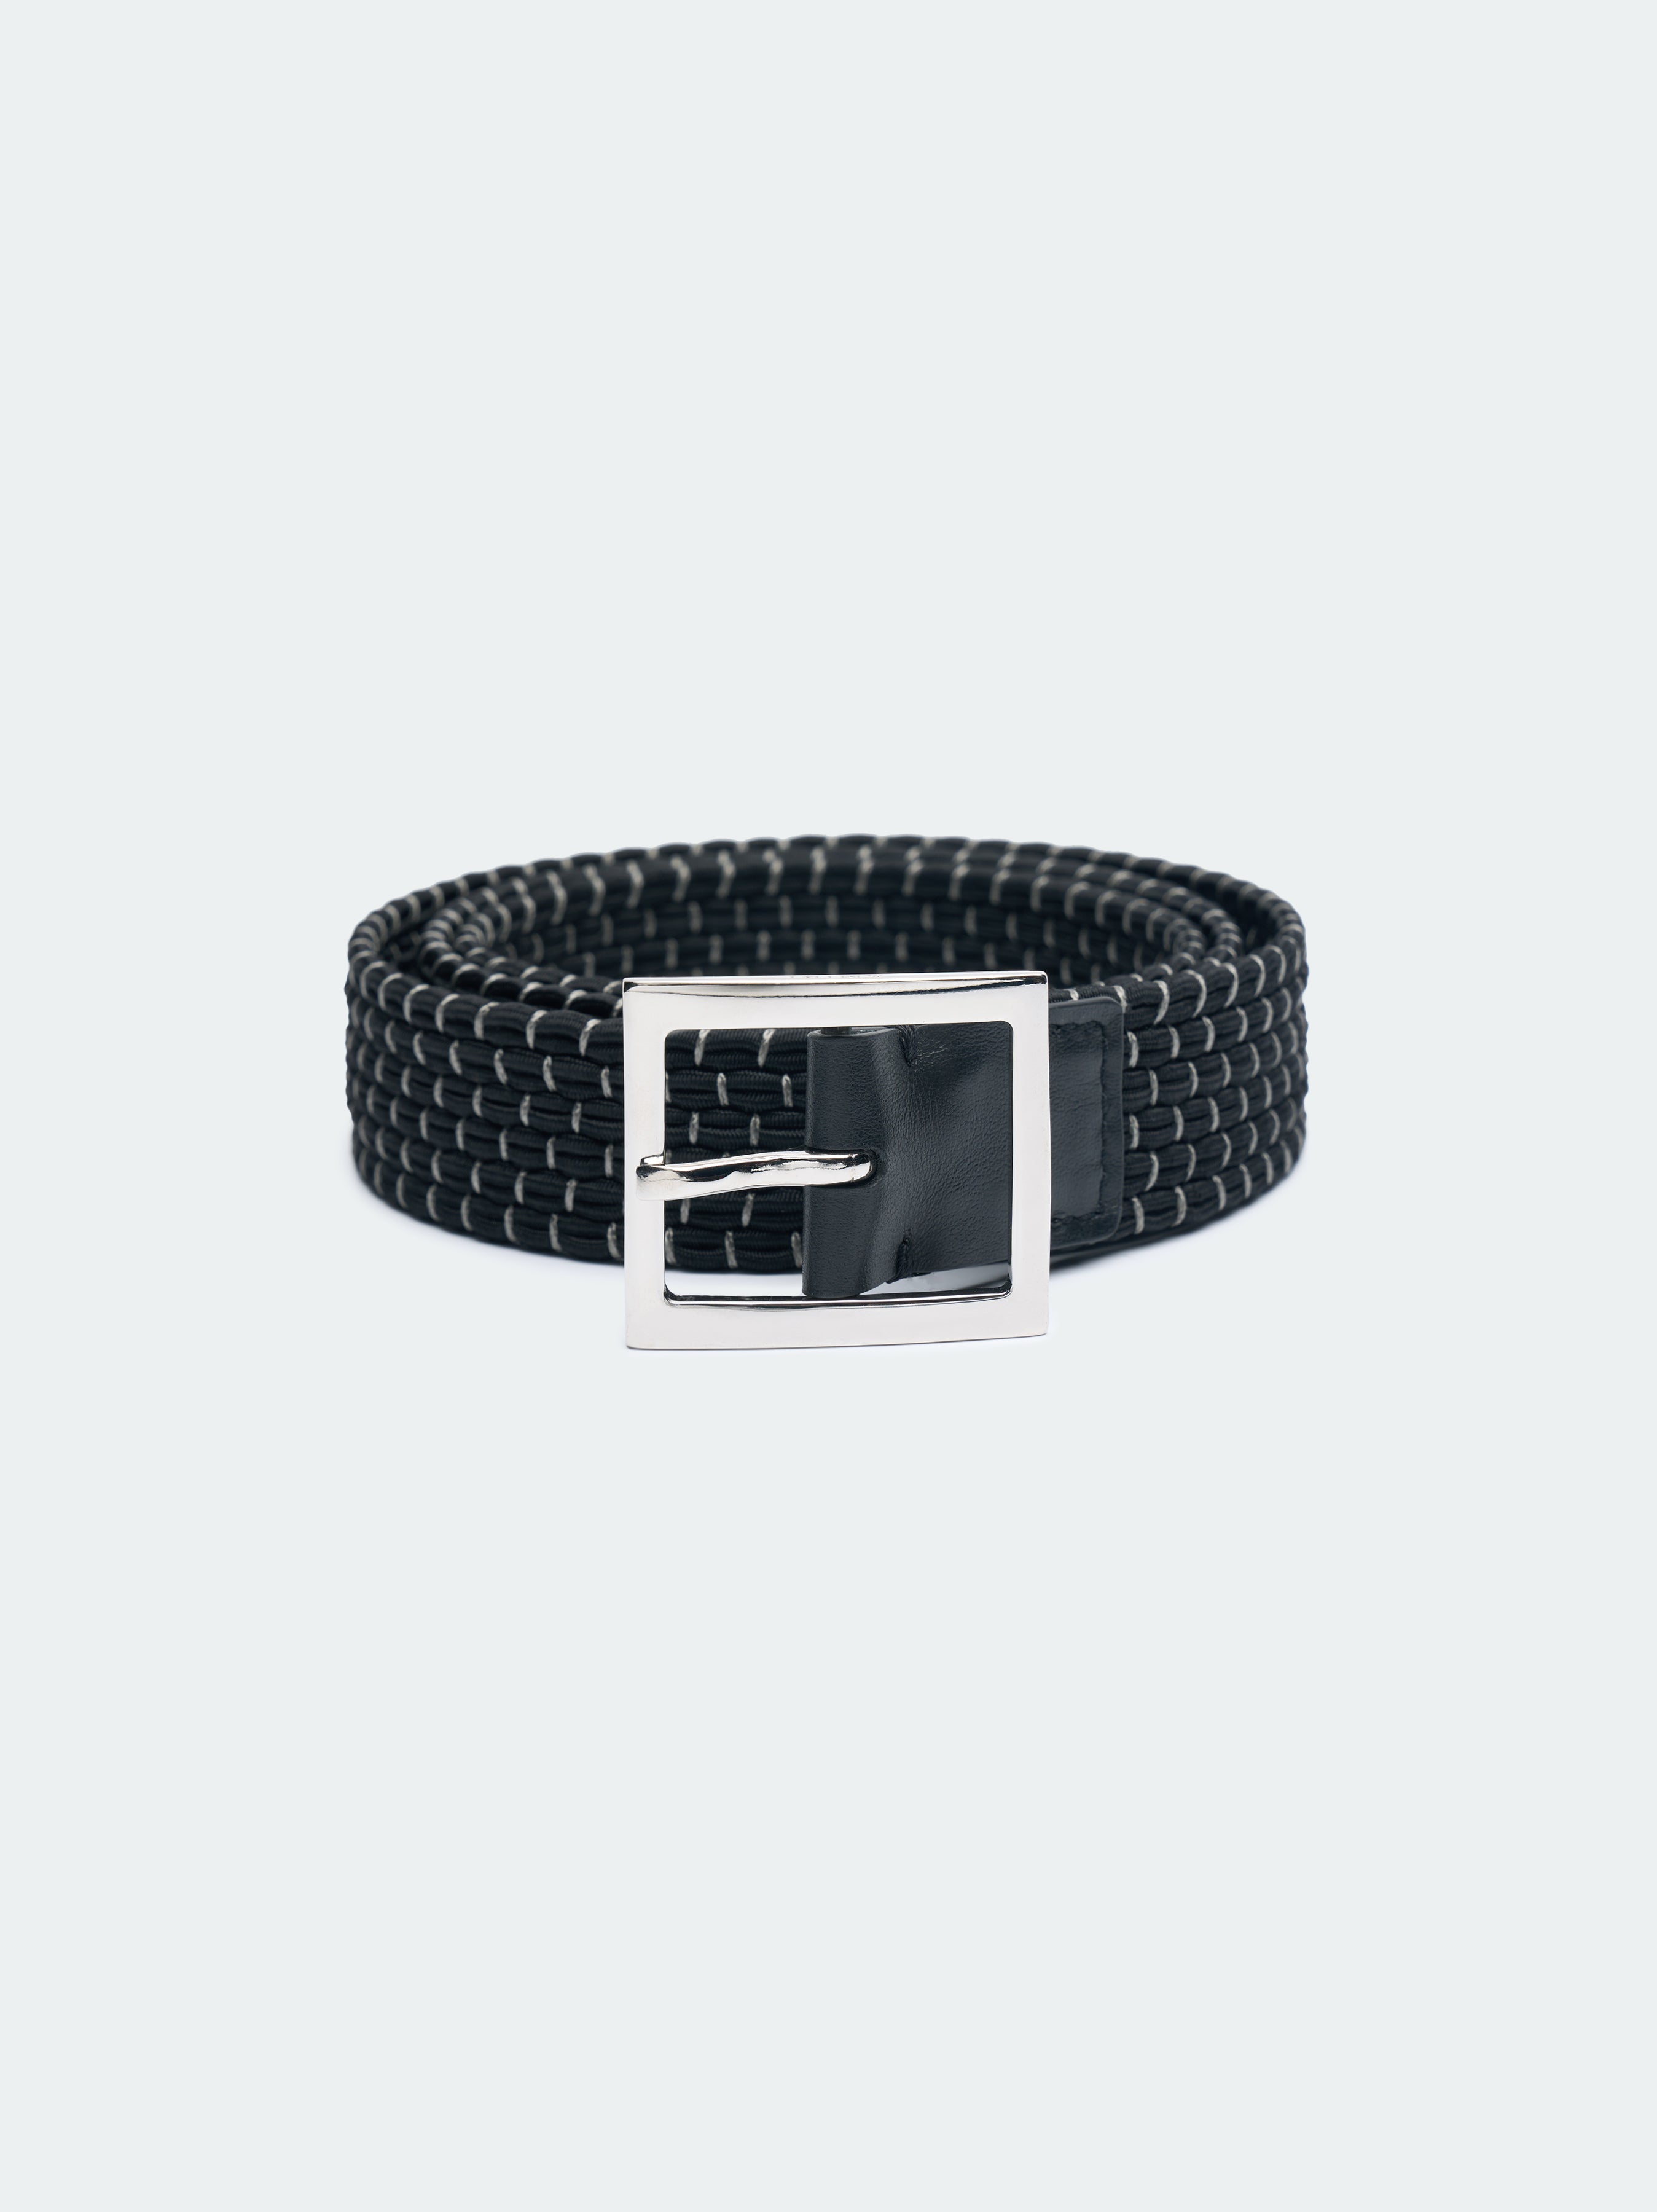 Product BRAIDED SKATER BELT - Black featured image